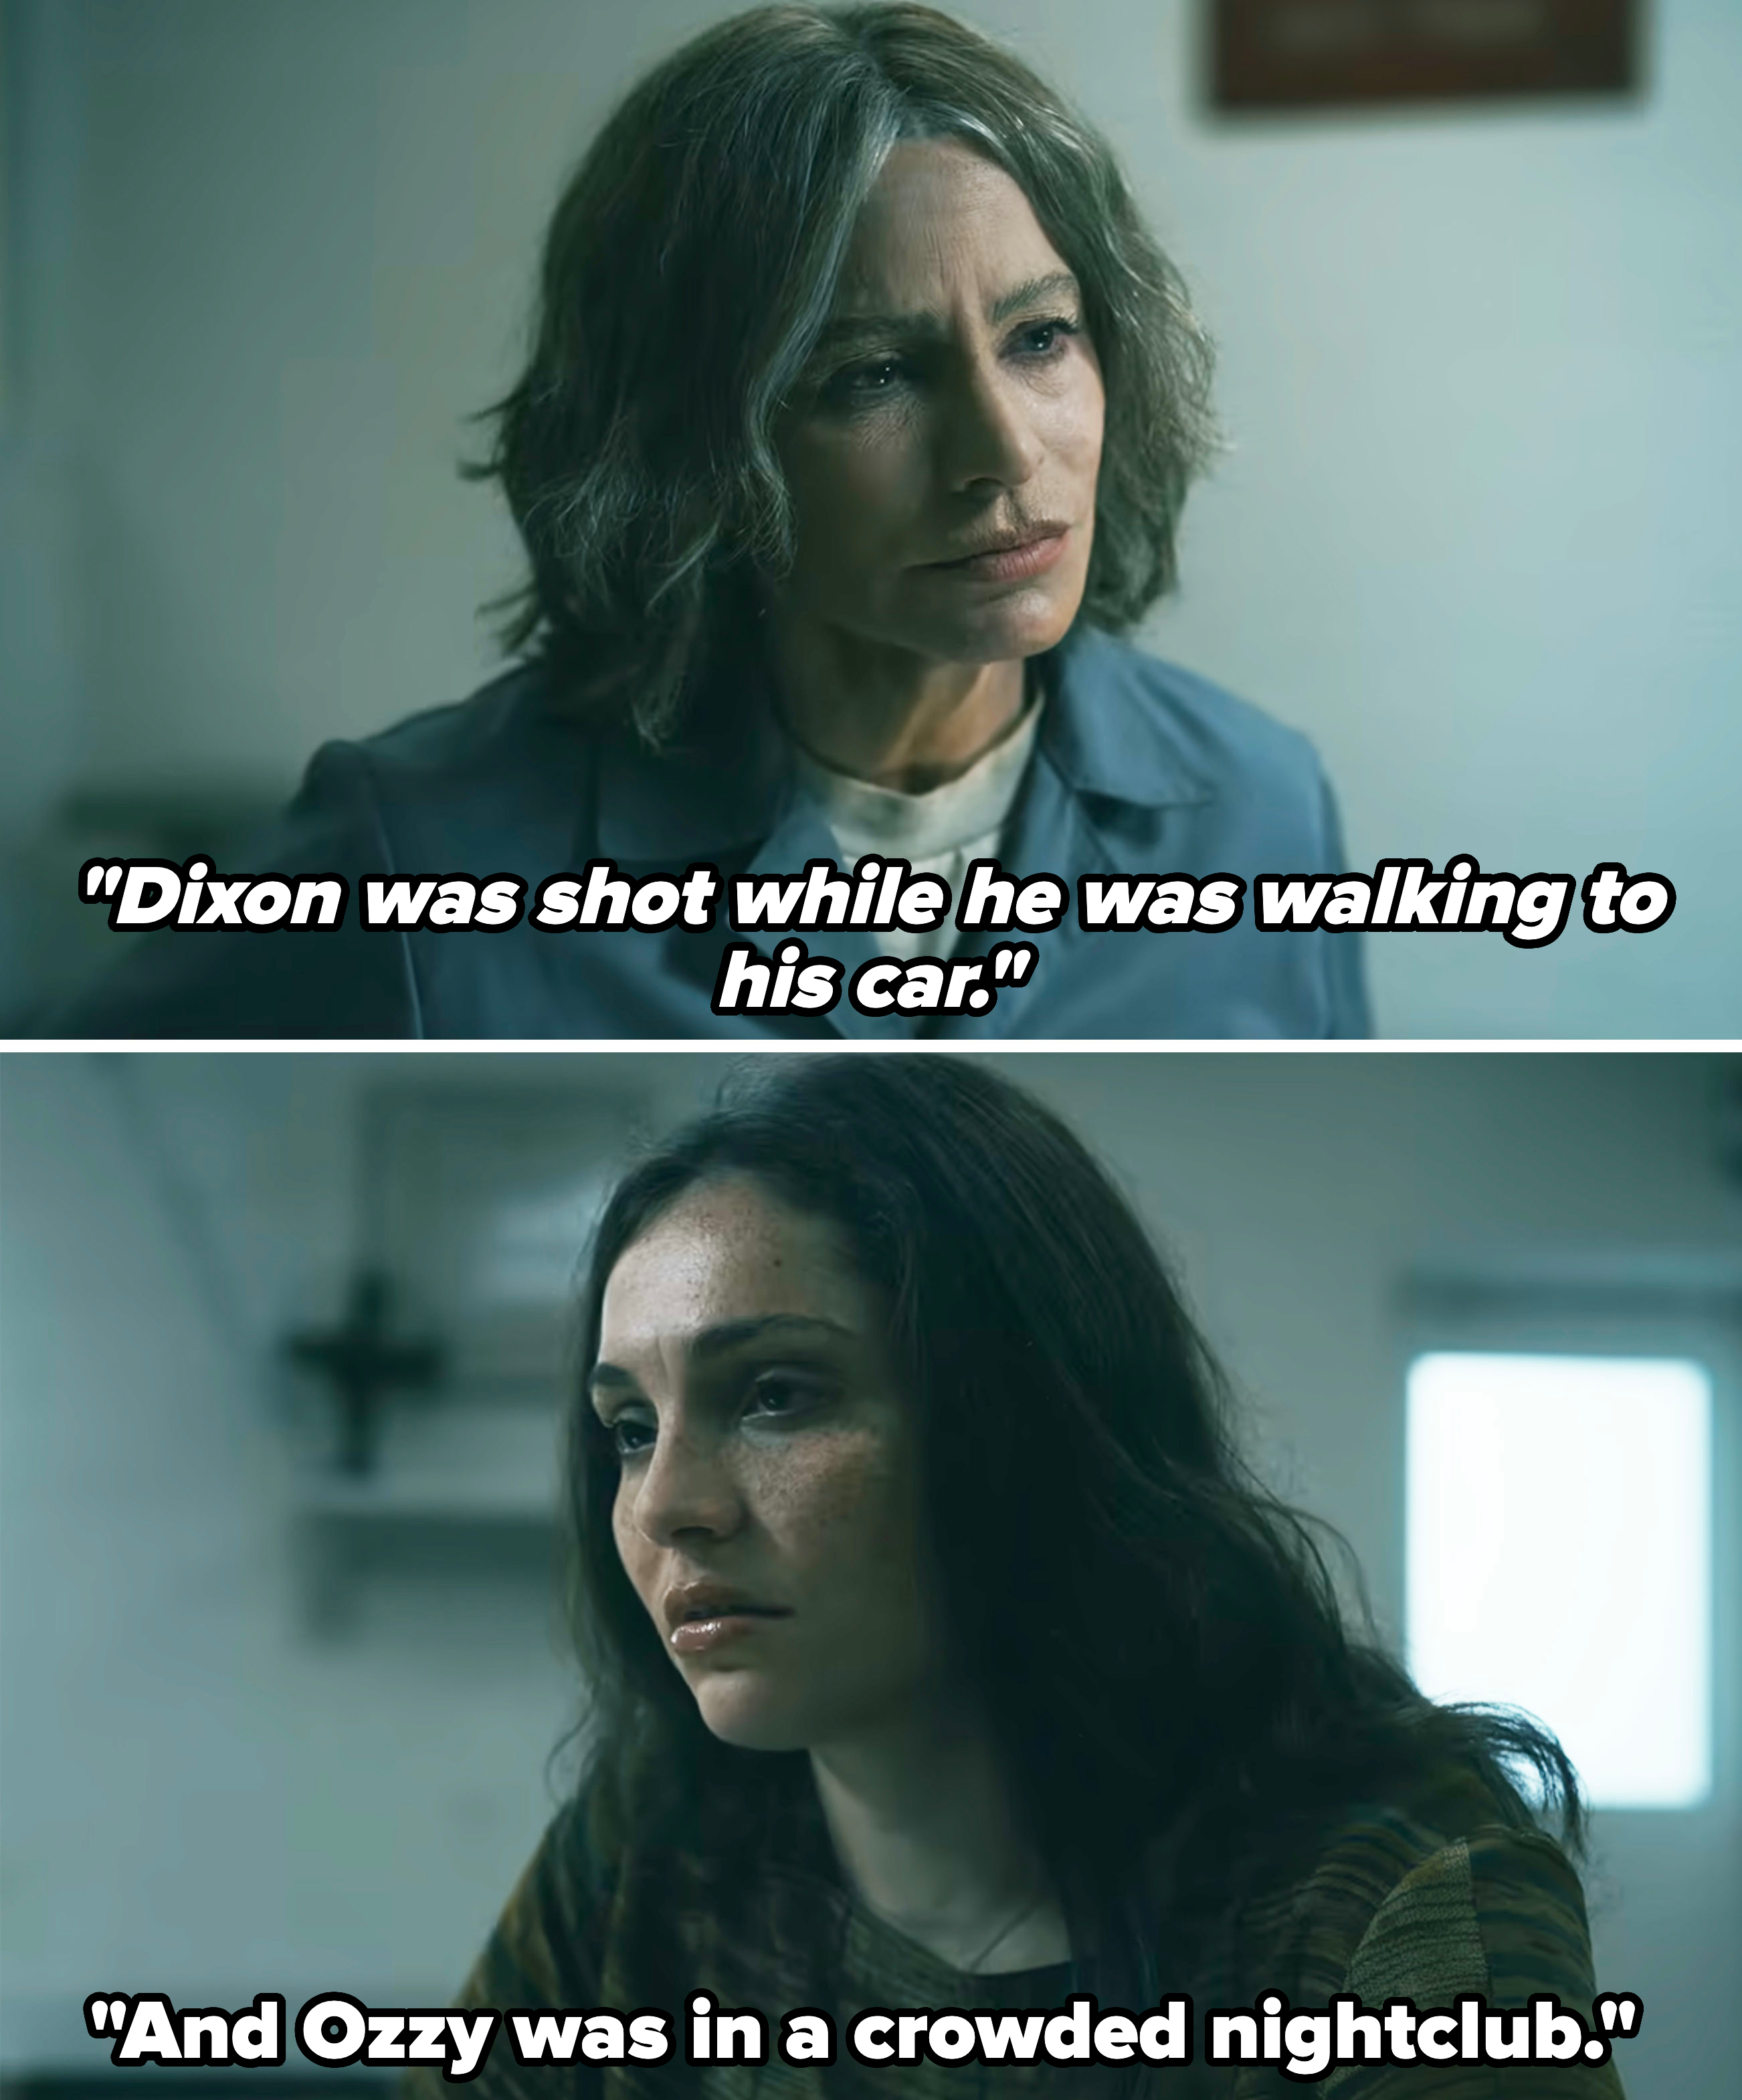 Griselda being told her son Dixon was shot while walking to his car in a scene from the show